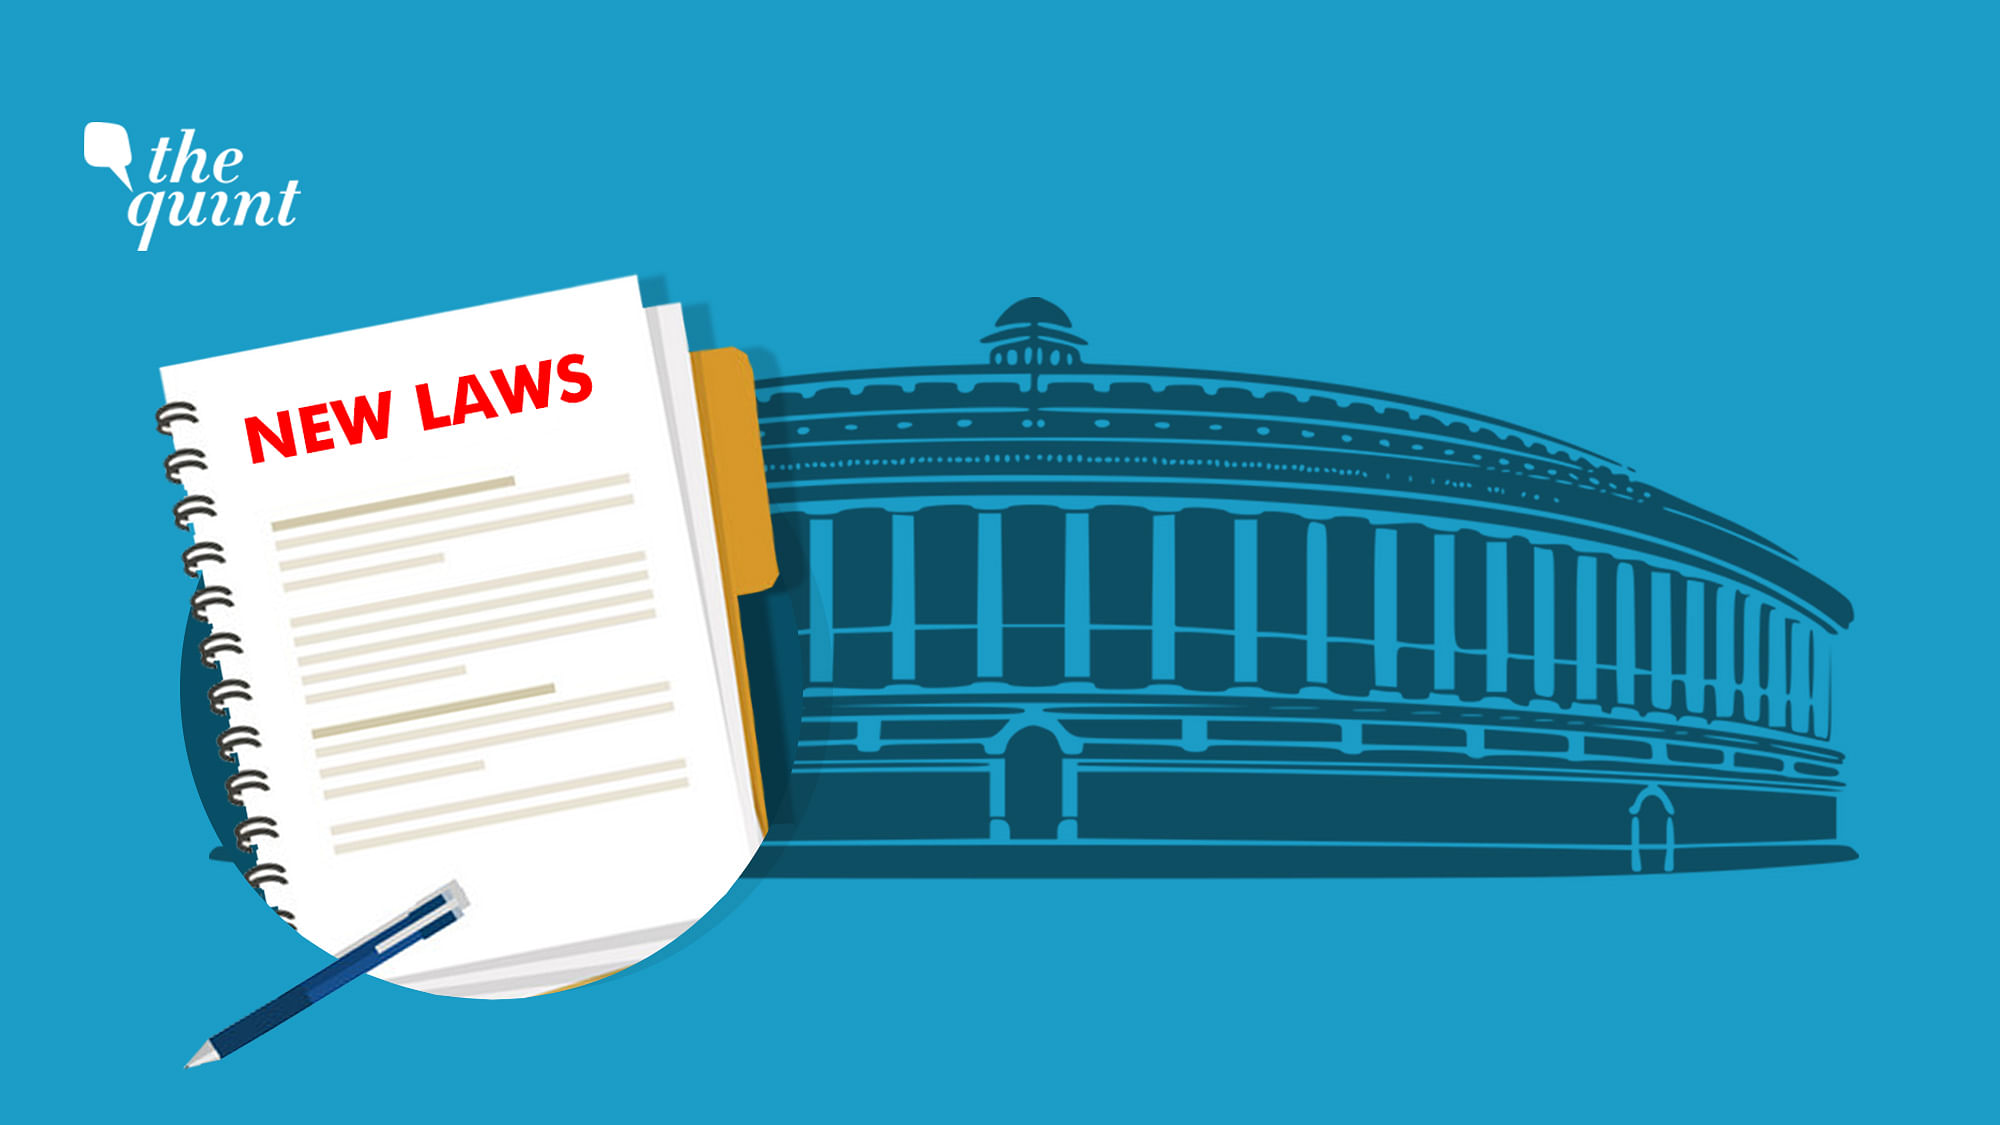 Several new laws will be applicable in J&amp;K after the reorganisation.